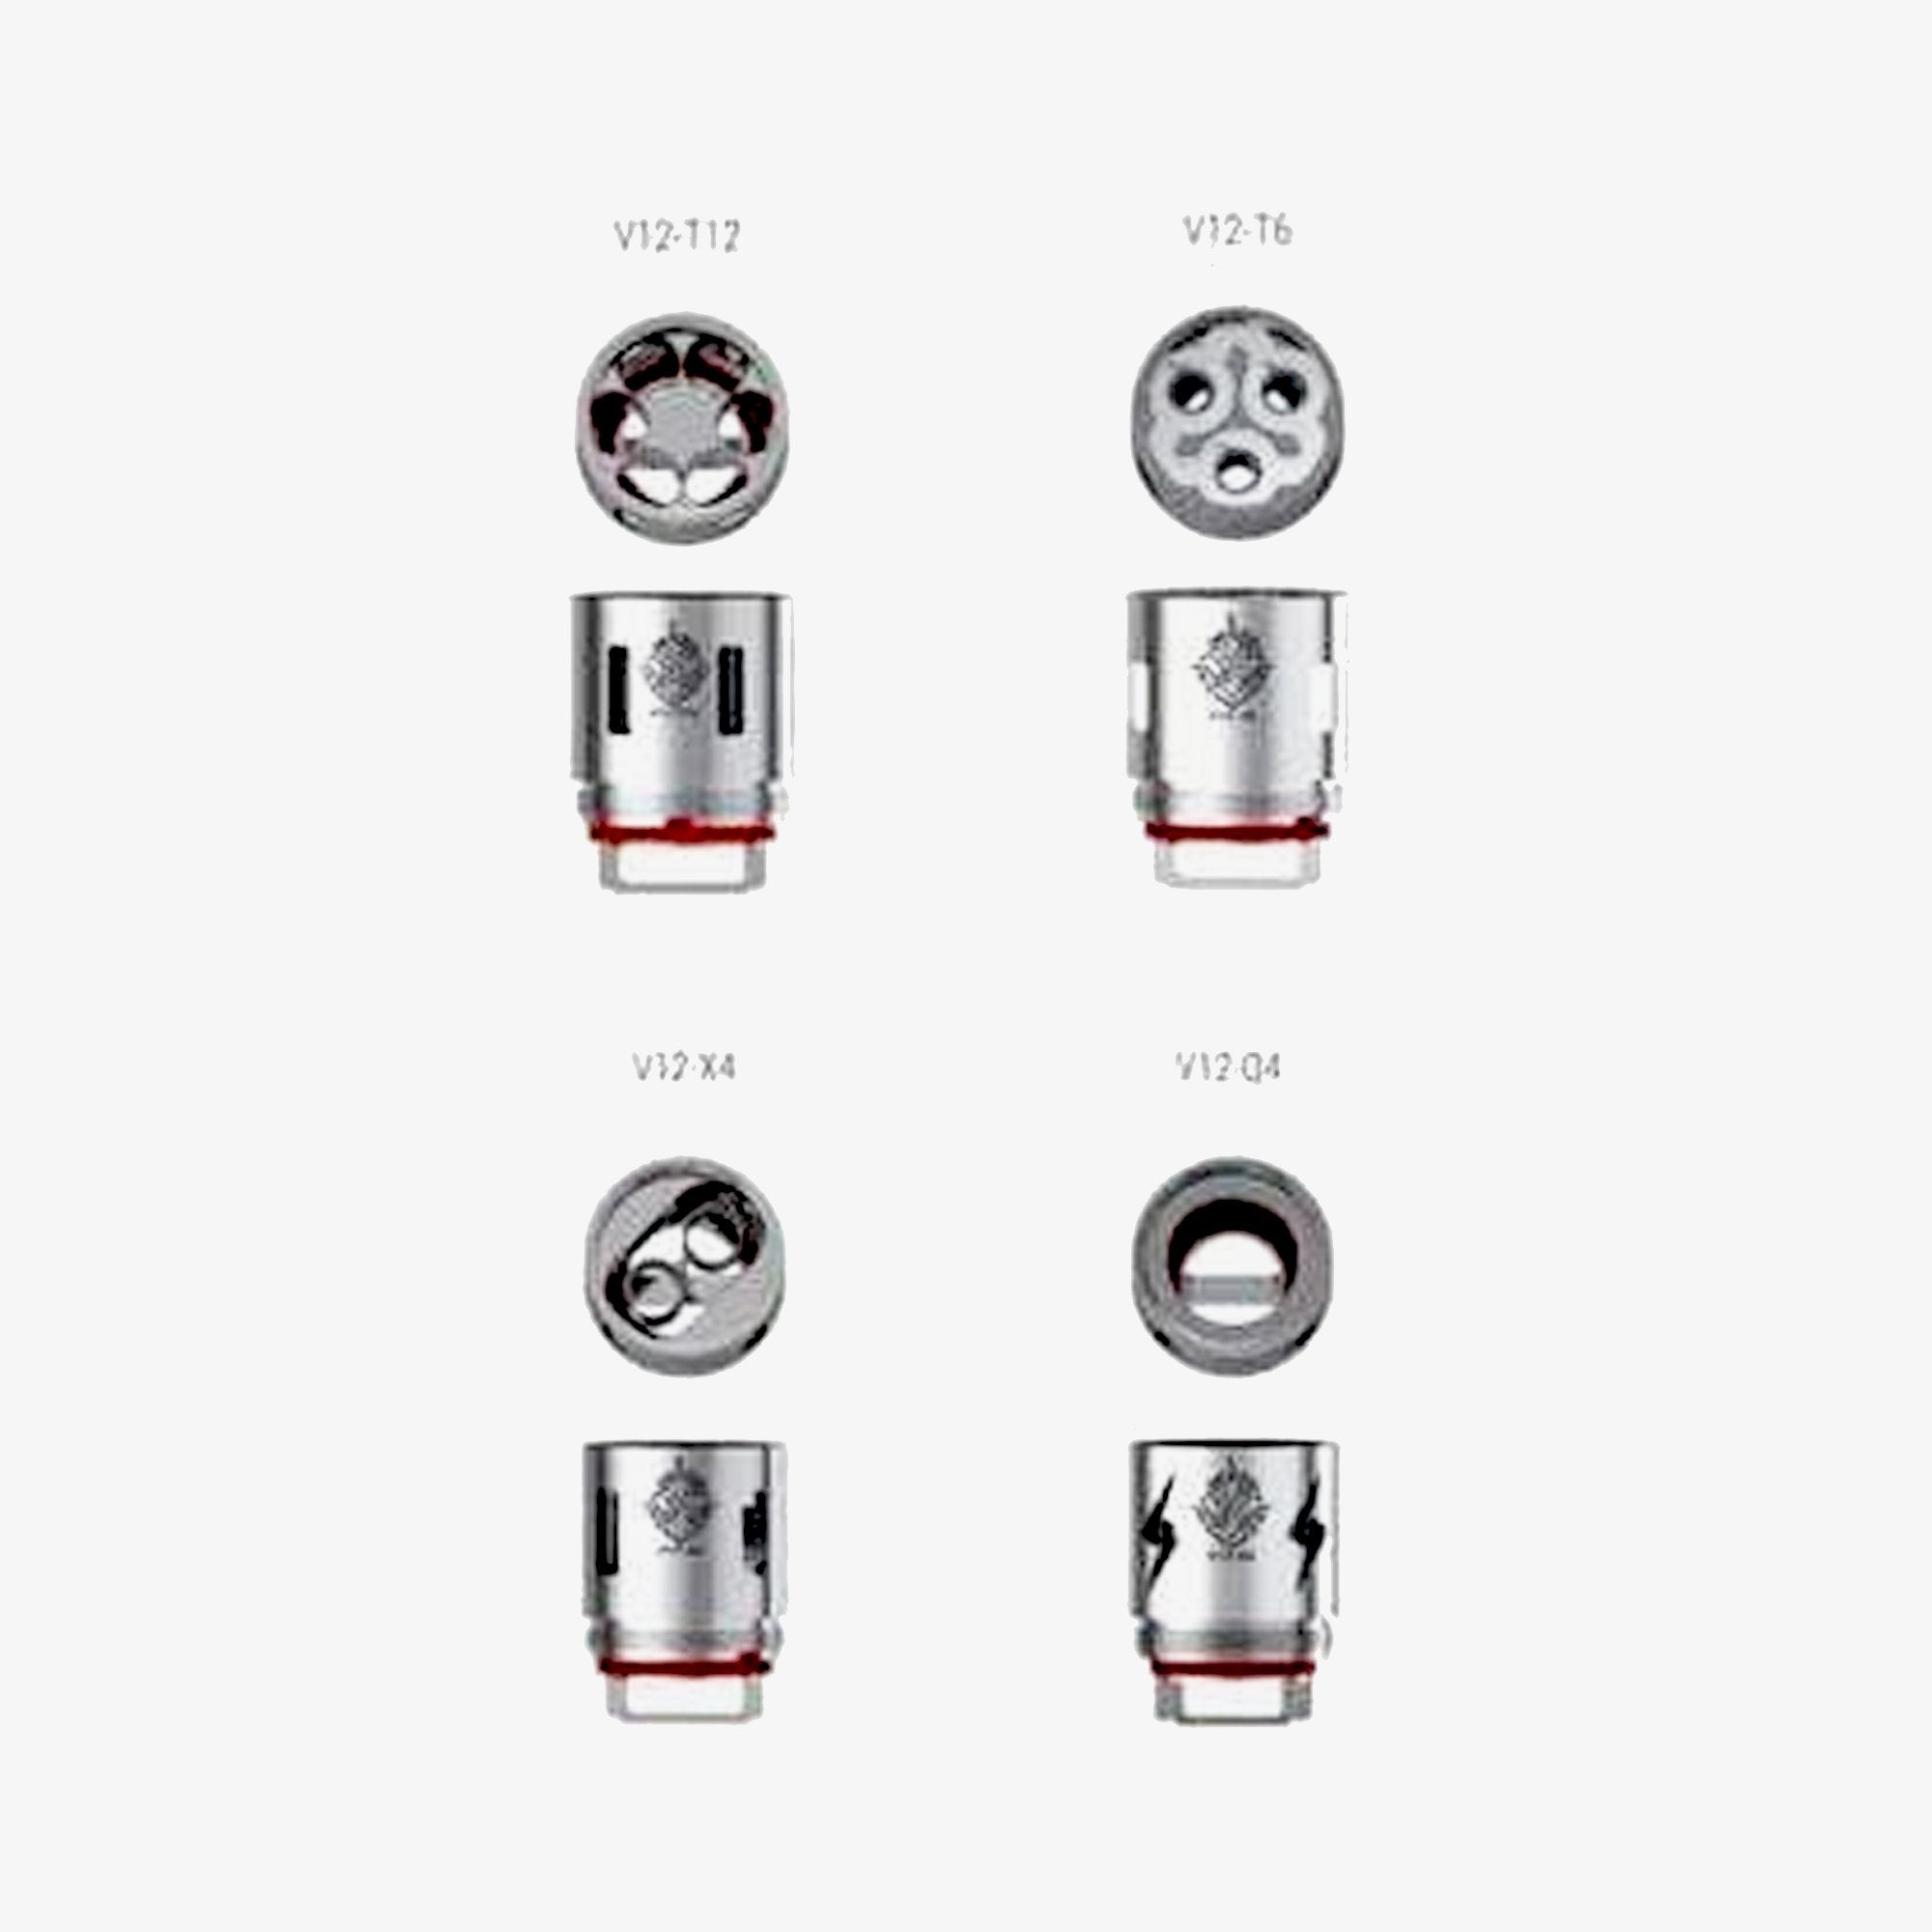 SMOK TFV12 Tank Replacement Coils | 3 Pack | Wolfvapes - Wolfvapes.co.uk-V12-T6